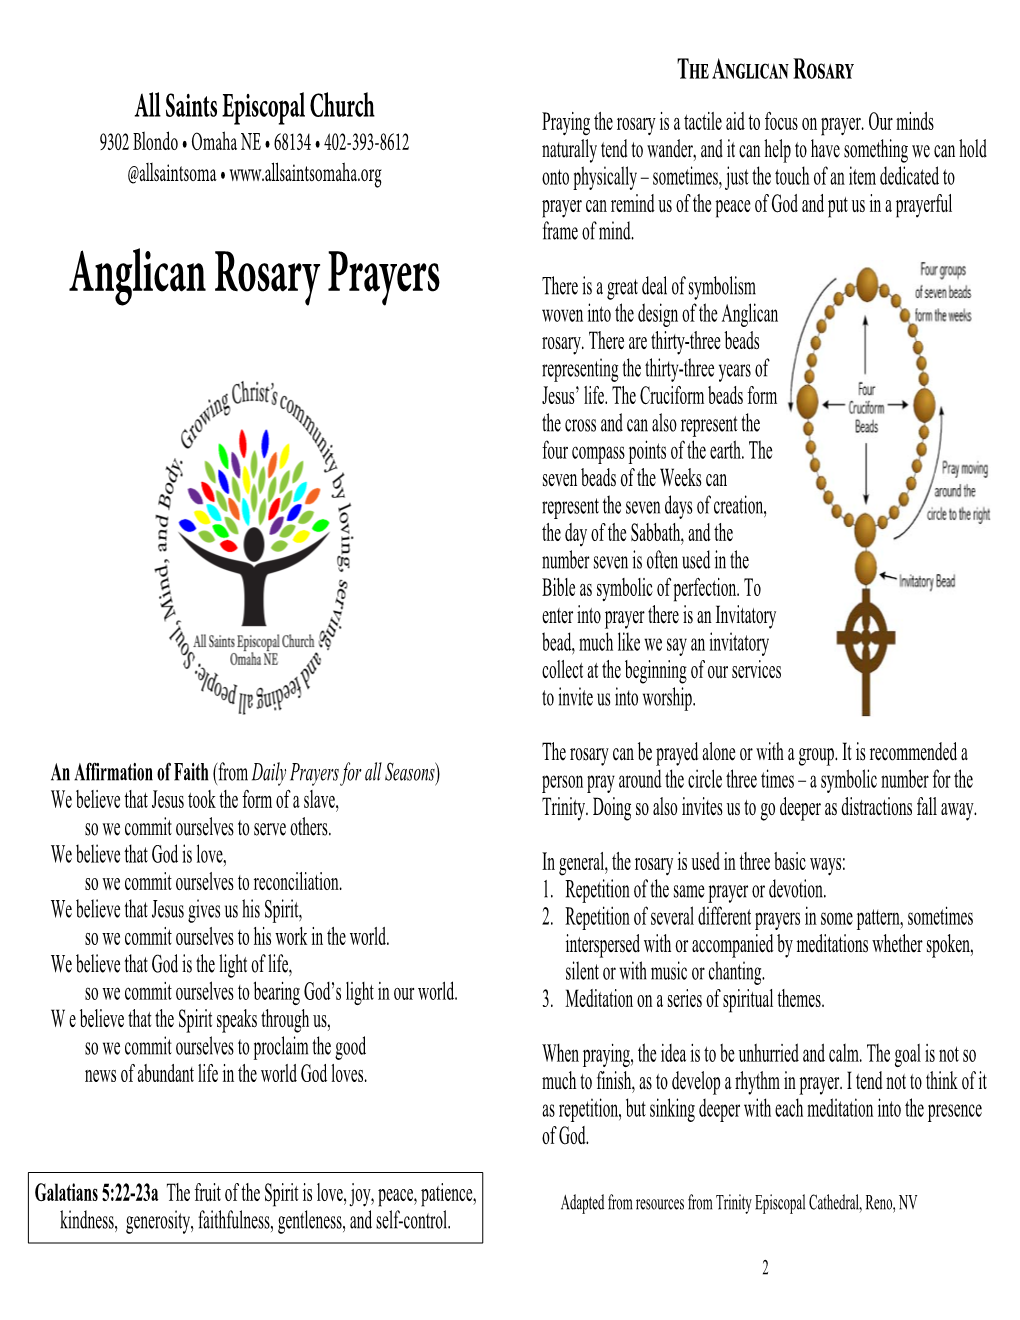 Anglican Rosary Prayers There Is a Great Deal of Symbolism Woven Into the Design of the Anglican Rosary